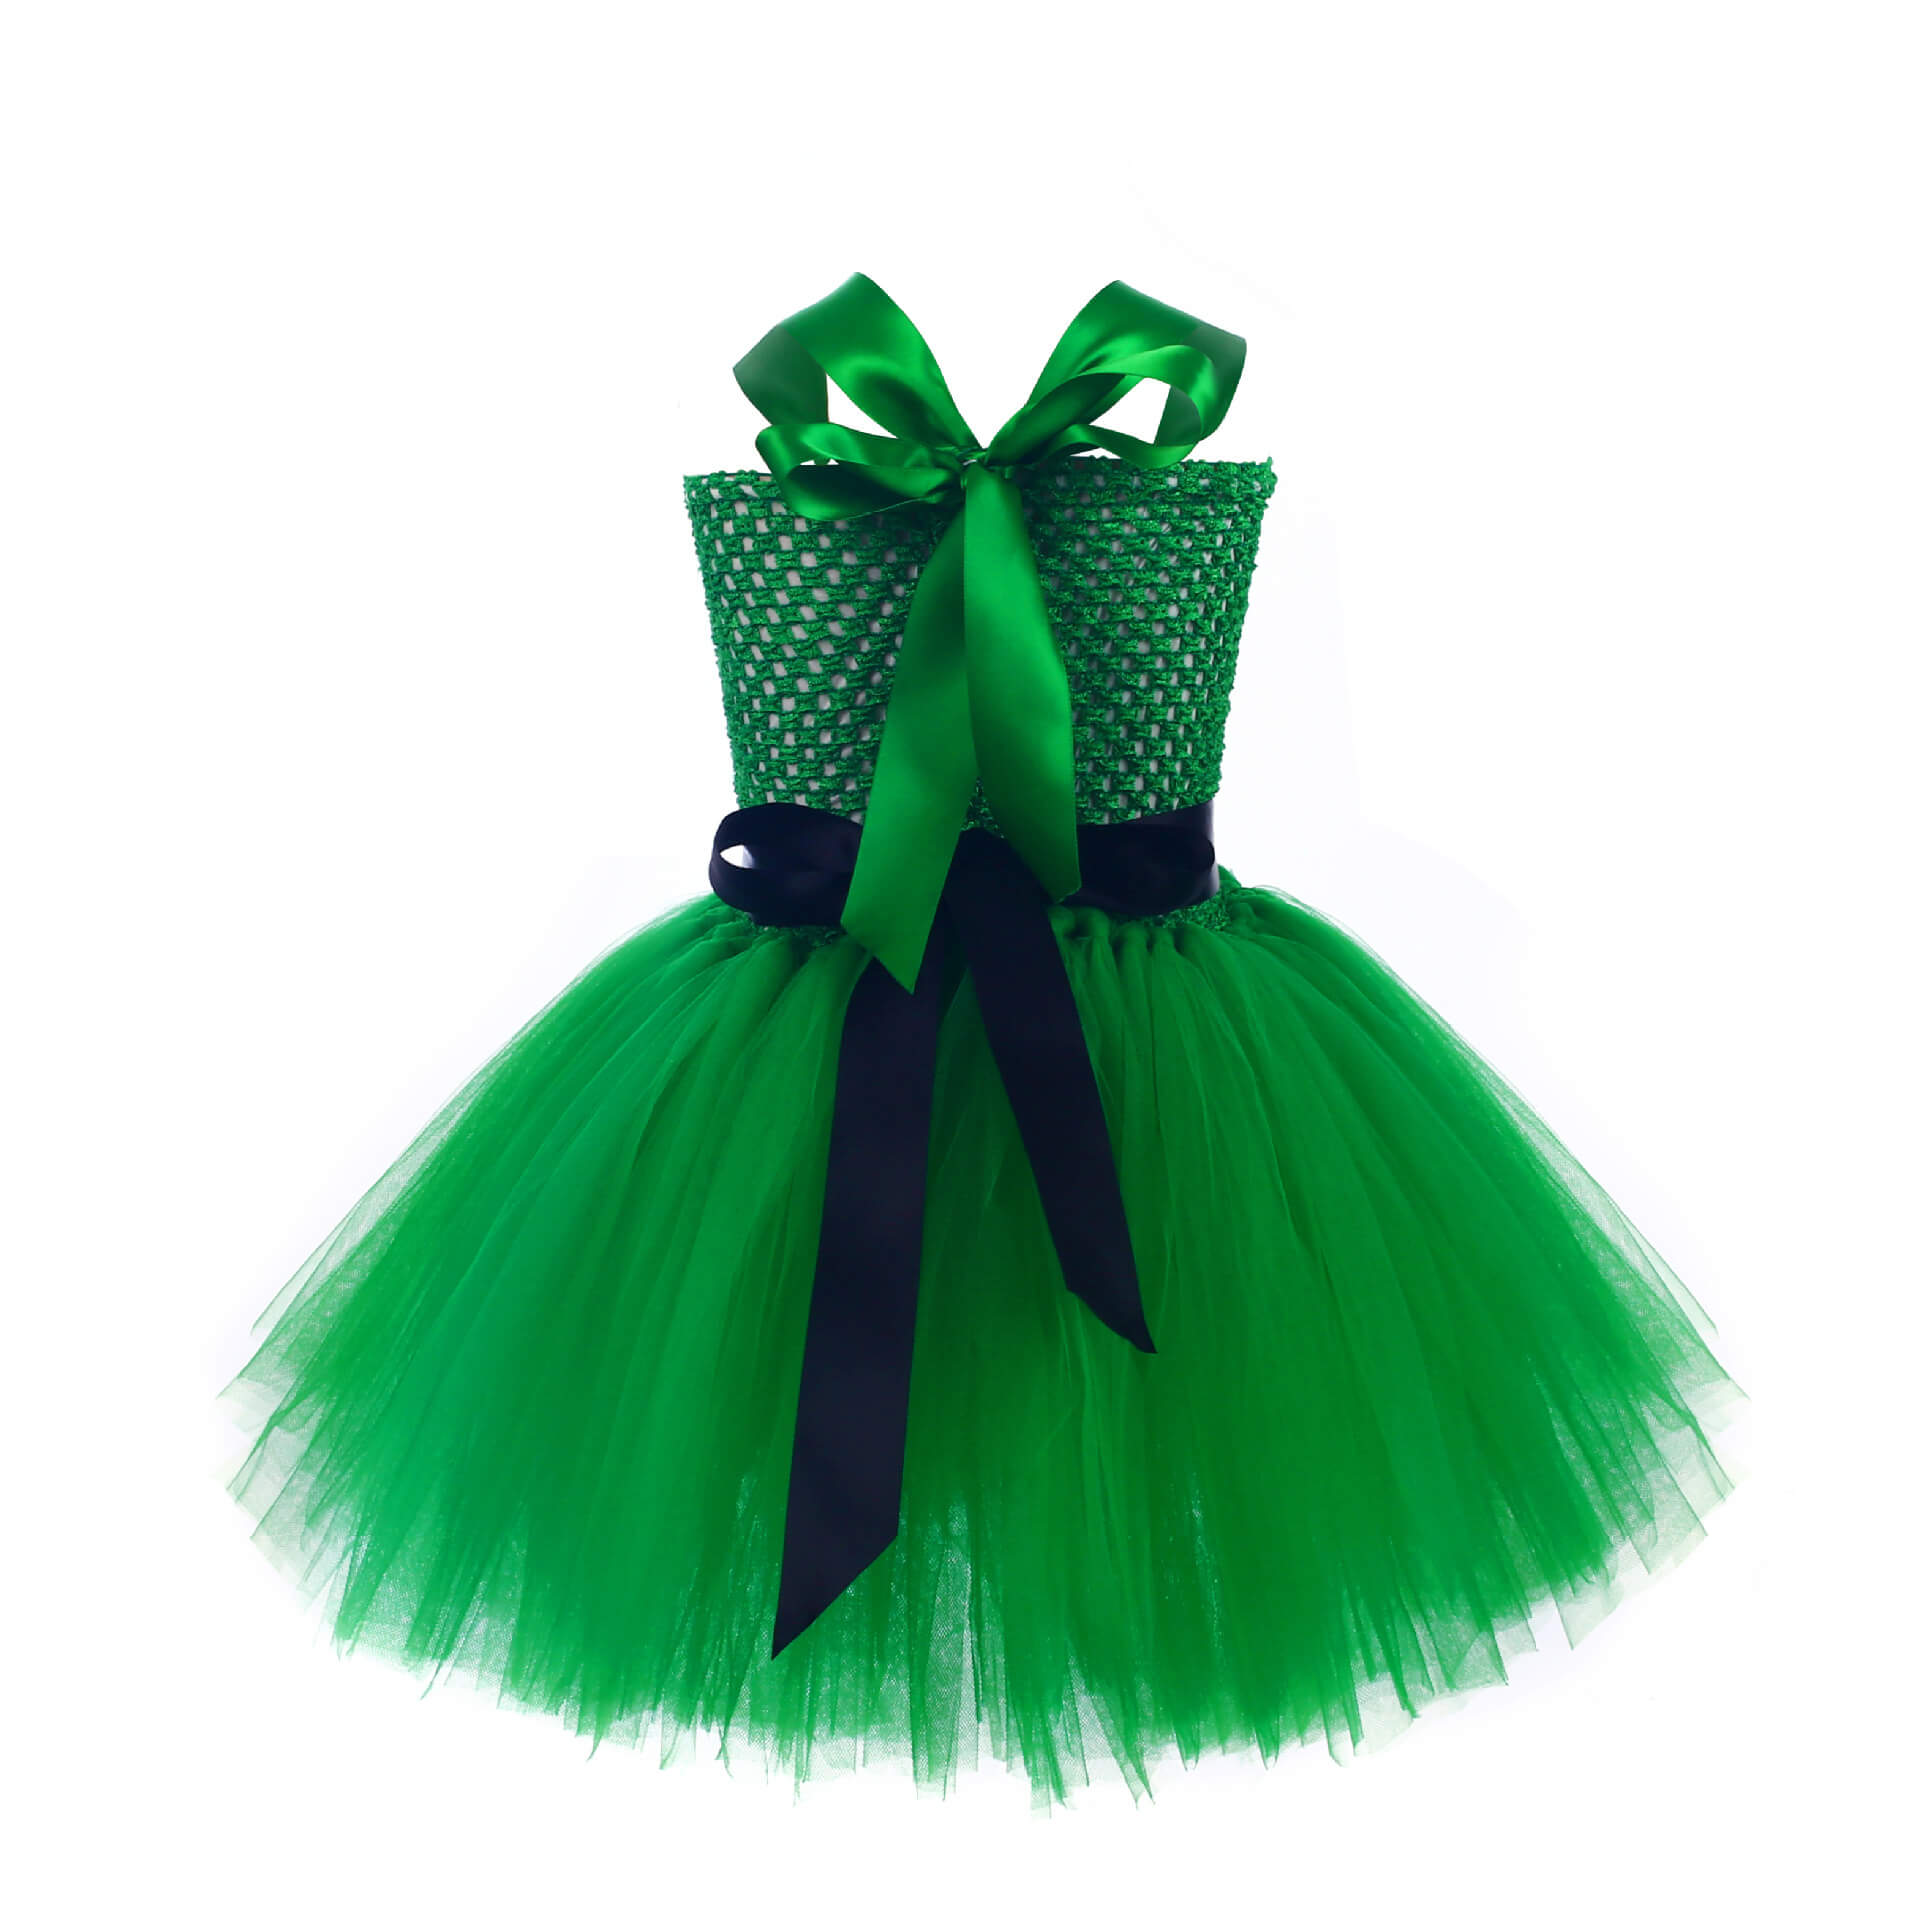 Grils St Patricks Day Costume Tulle Green Ball Gown Dress with Headband 2pcs Suit for Leprechaun